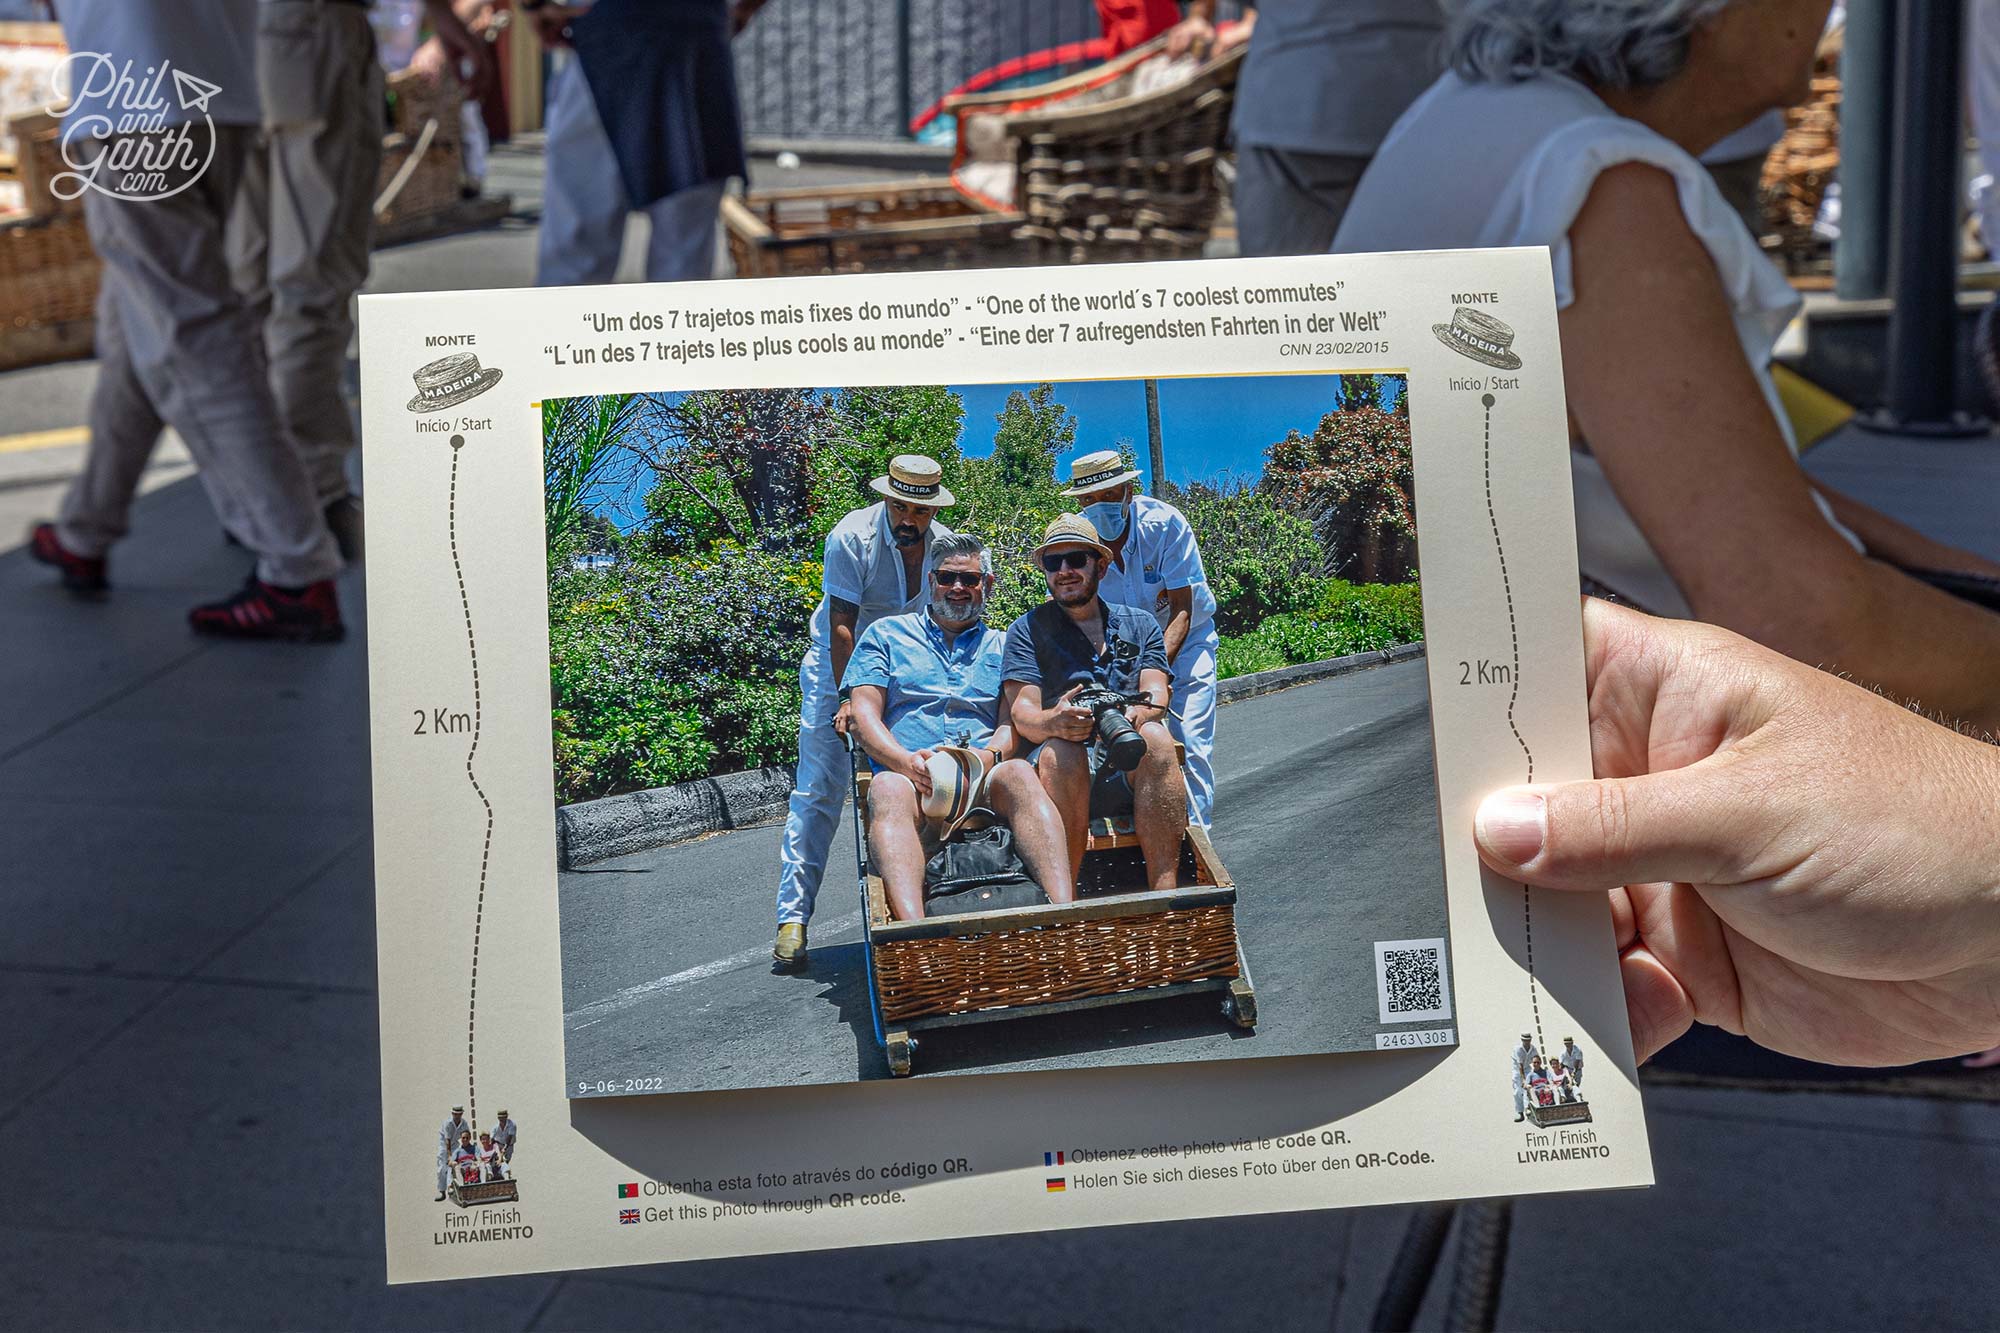 At the end of the ride you can purchase a souvenir photo